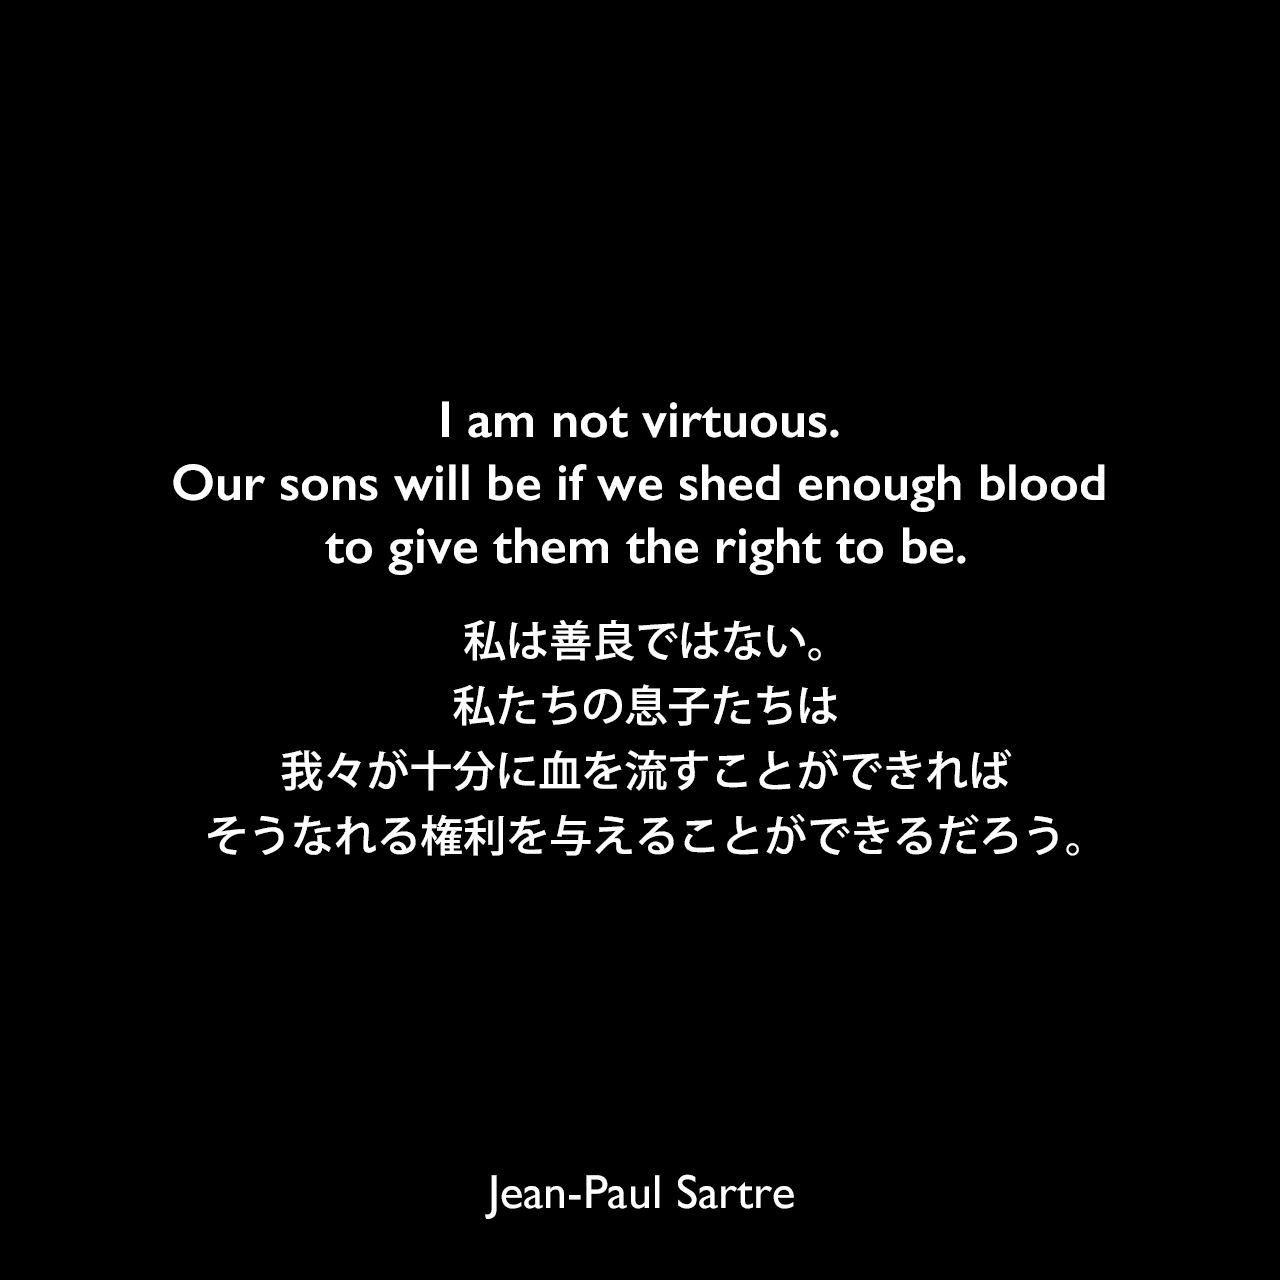 I am not virtuous. Our sons will be if we shed enough blood to give them the right to be.私は善良ではない。私たちの息子たちは、我々が十分に血を流すことができれば、そうなれる権利を与えることができるだろう。- サルトルによる戯曲「悪魔と神」よりJean-Paul Sartre